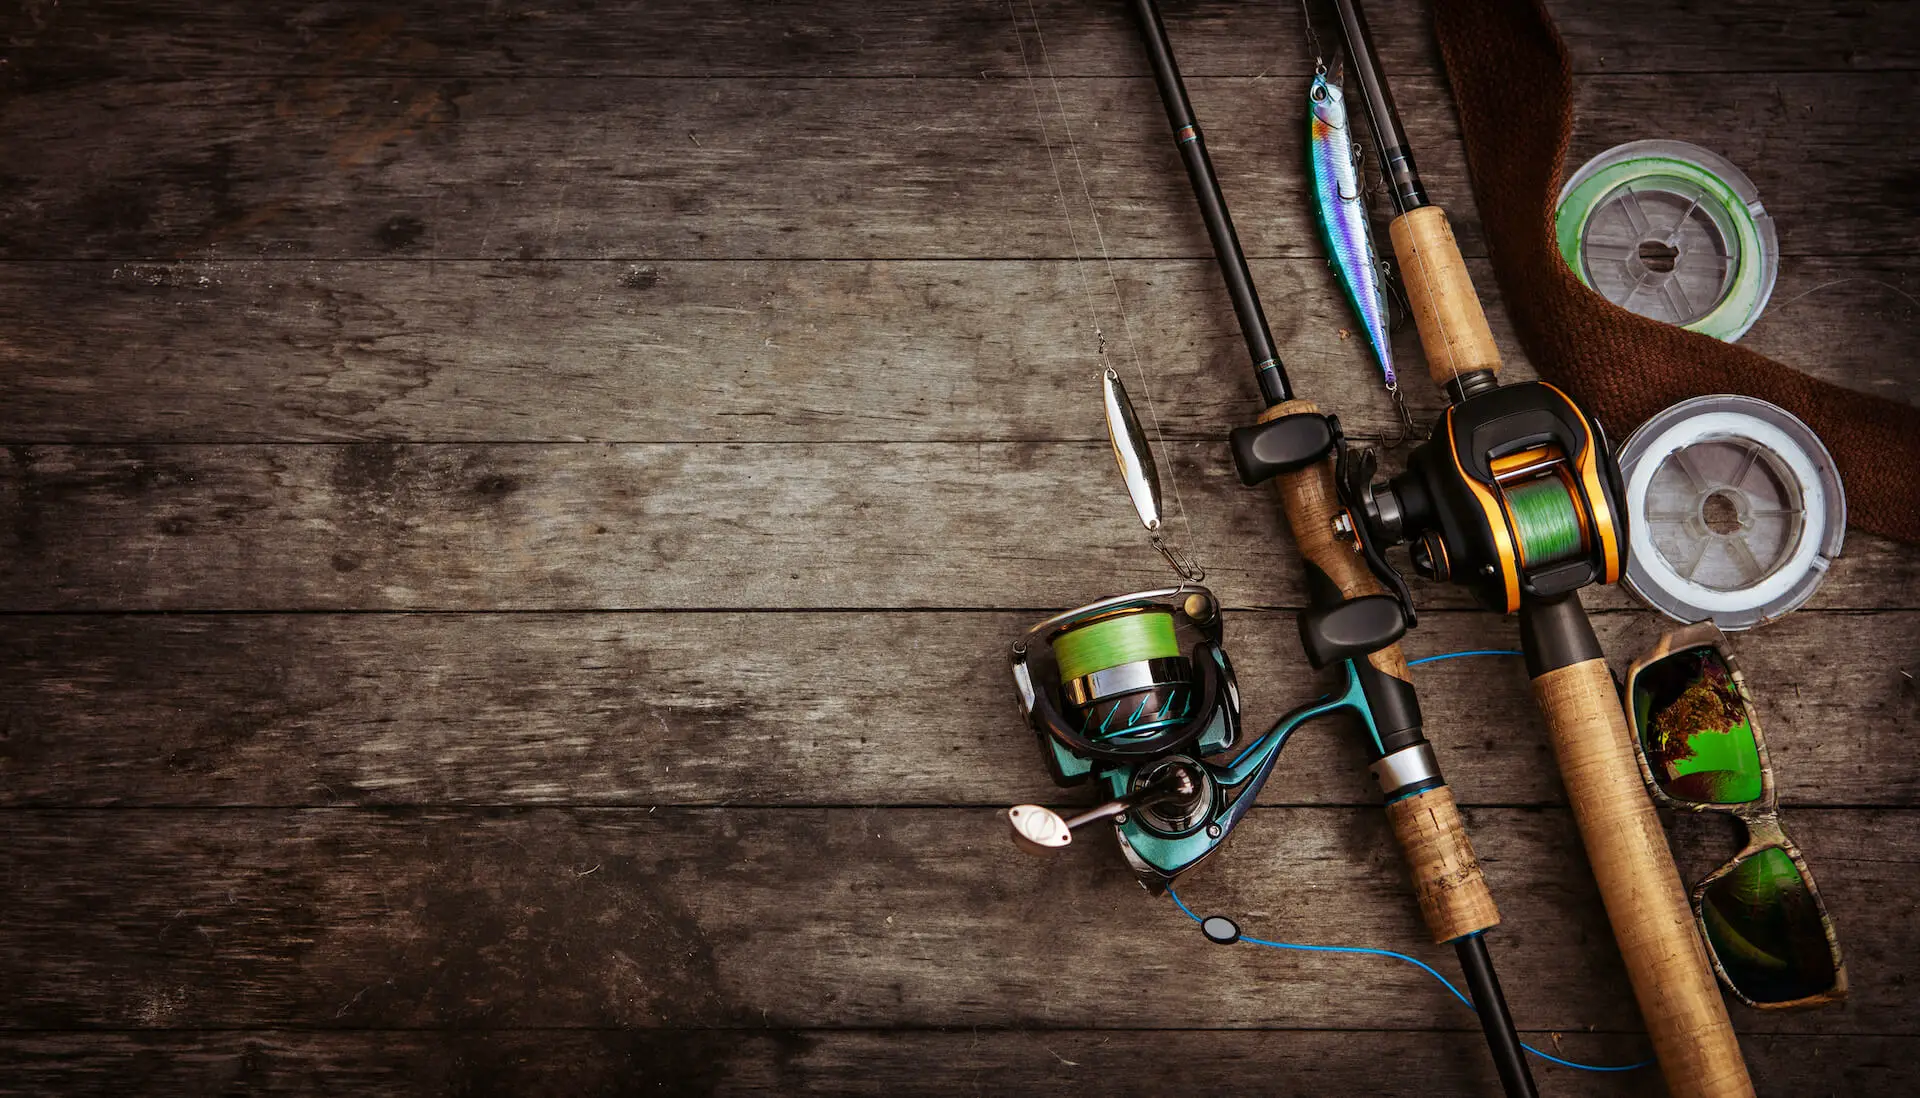 Spinning Reel and Baitcasting Reel on wooden floor: Review of the best baitcasting reel under 100